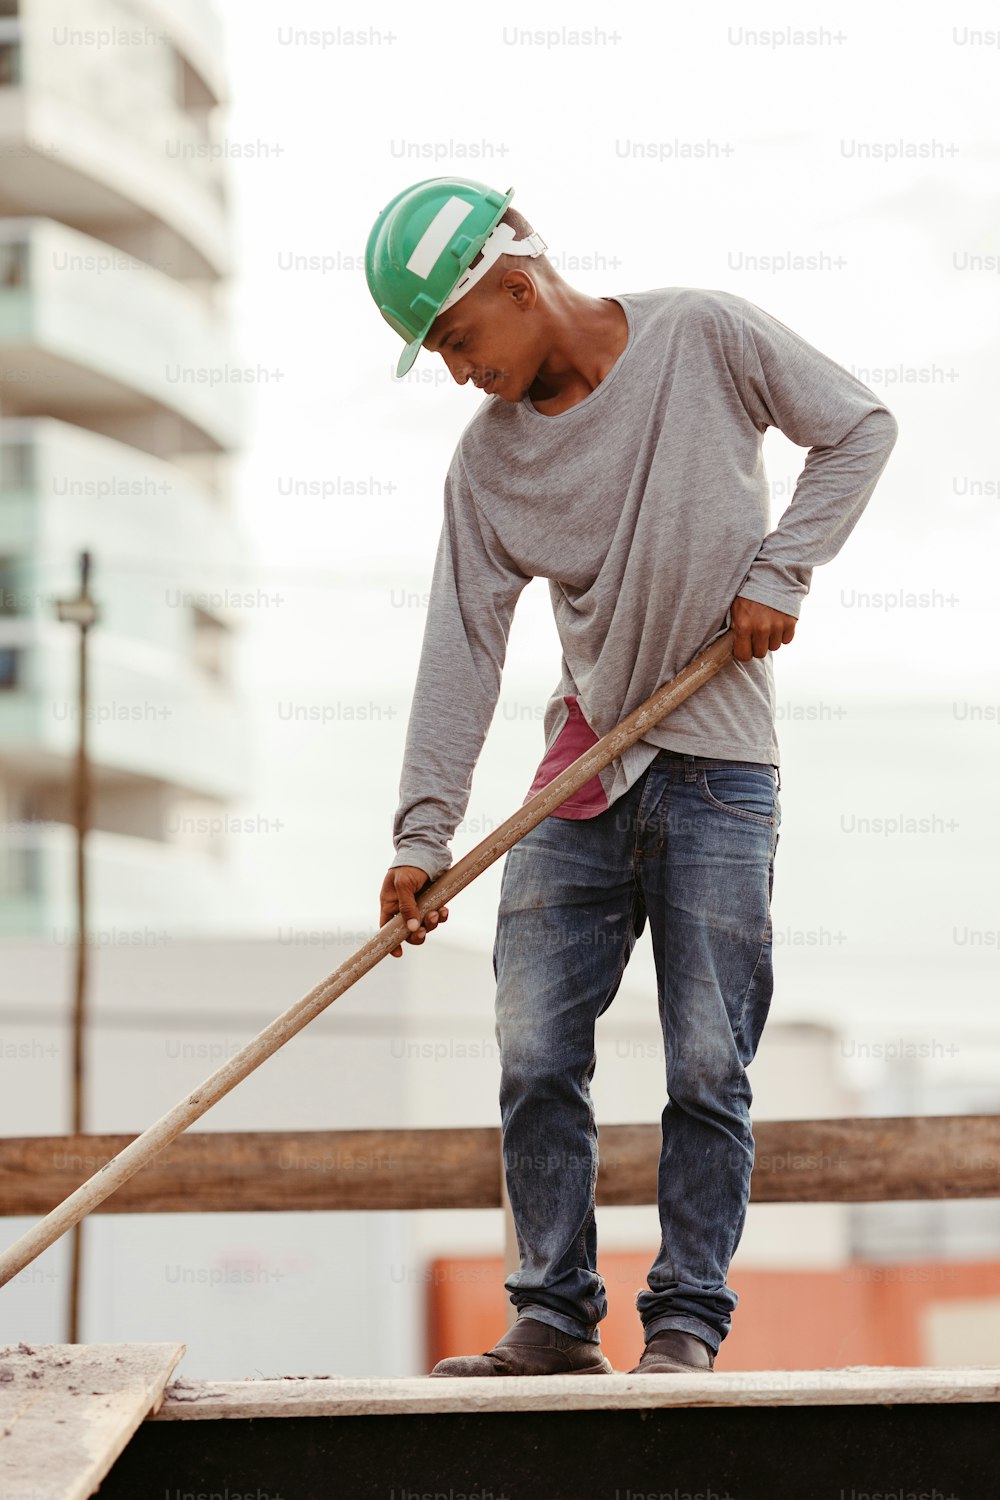 a man in a hard hat is holding a long pole